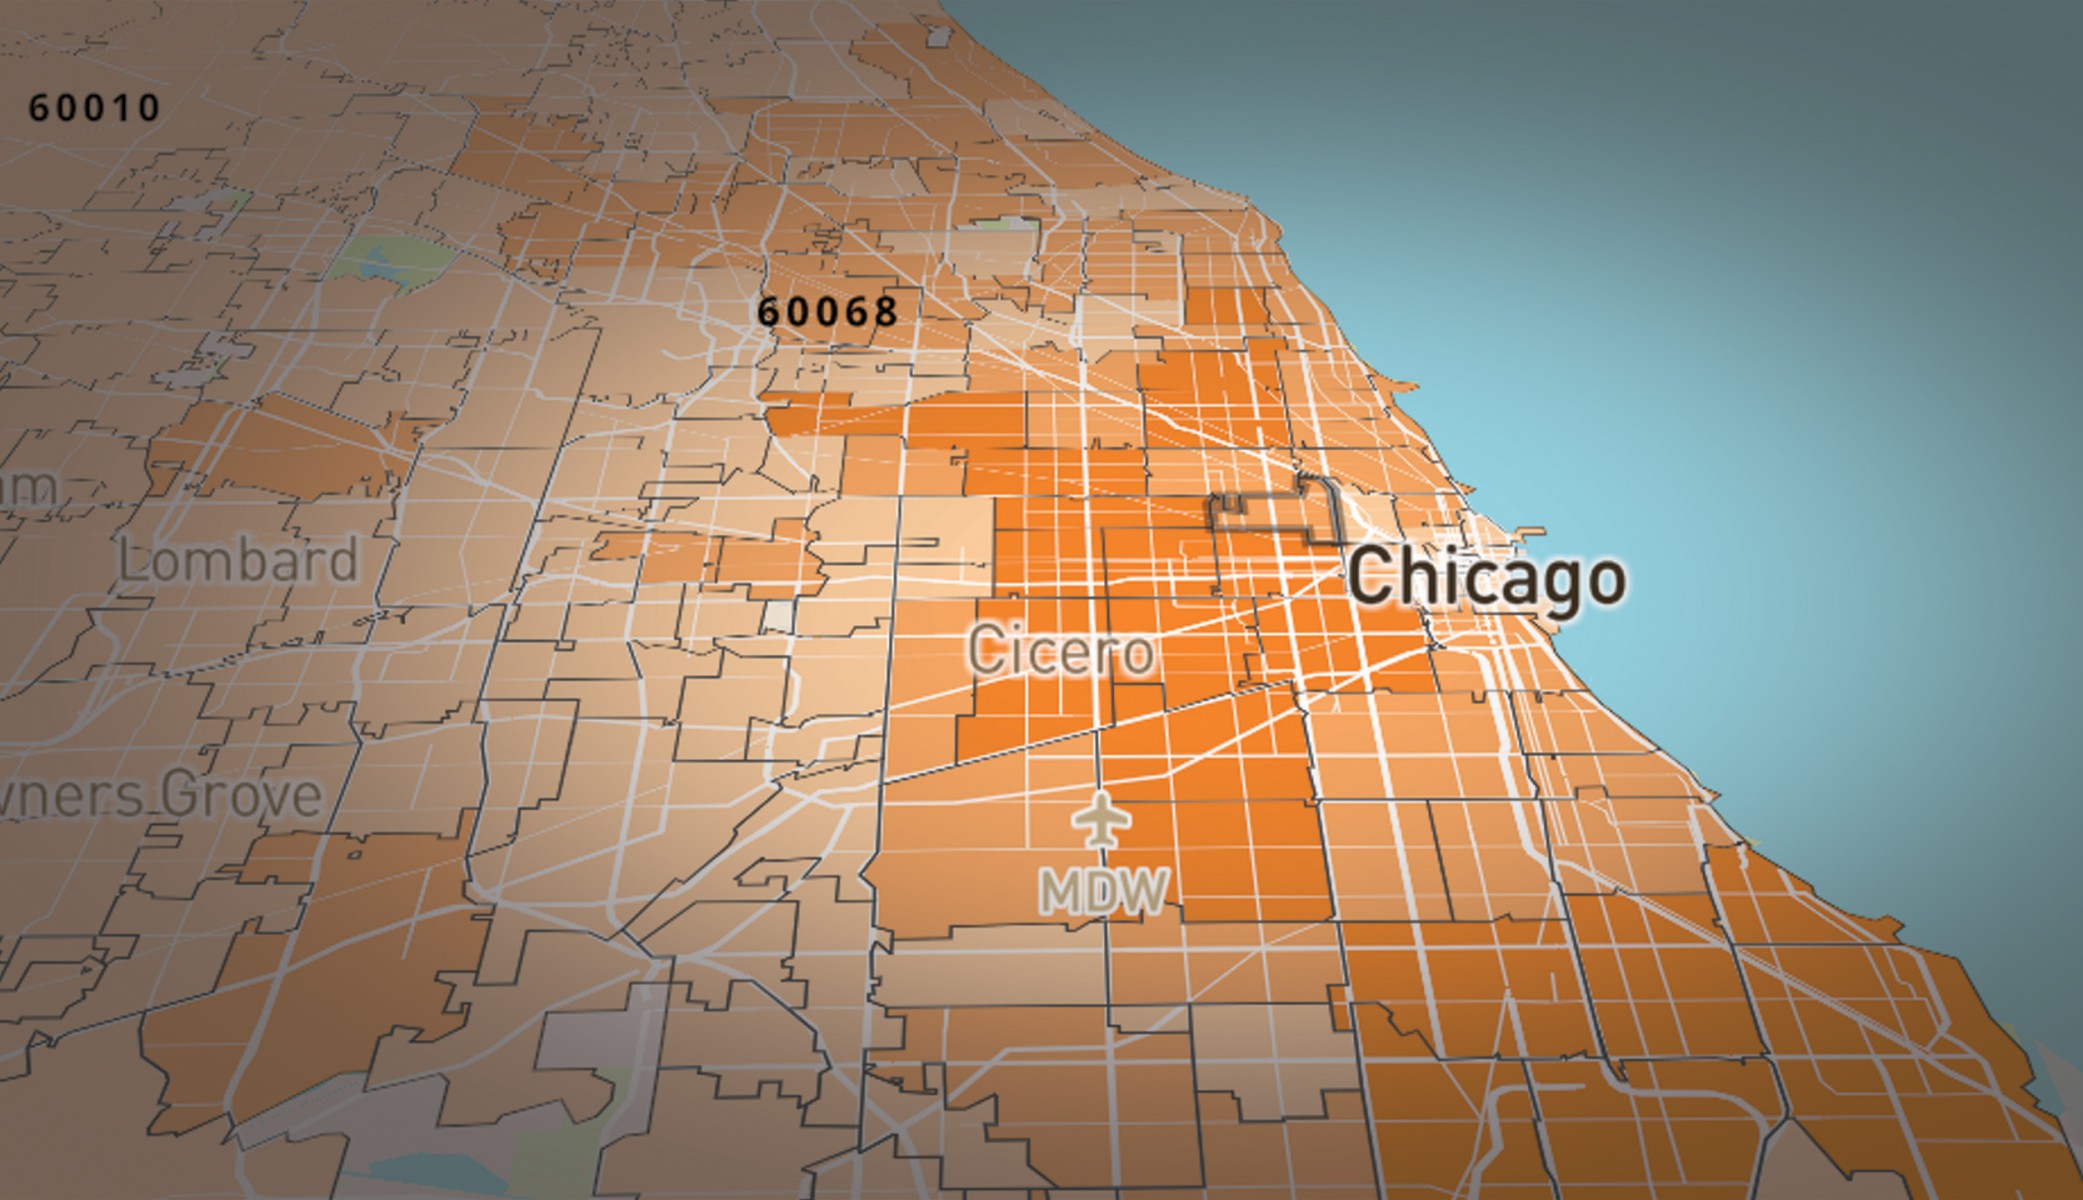 Chicago Il Zip Code Map Map By ZIP Code Of Coronavirus COVID 19 Cases Illinois | WBEZ Chicago